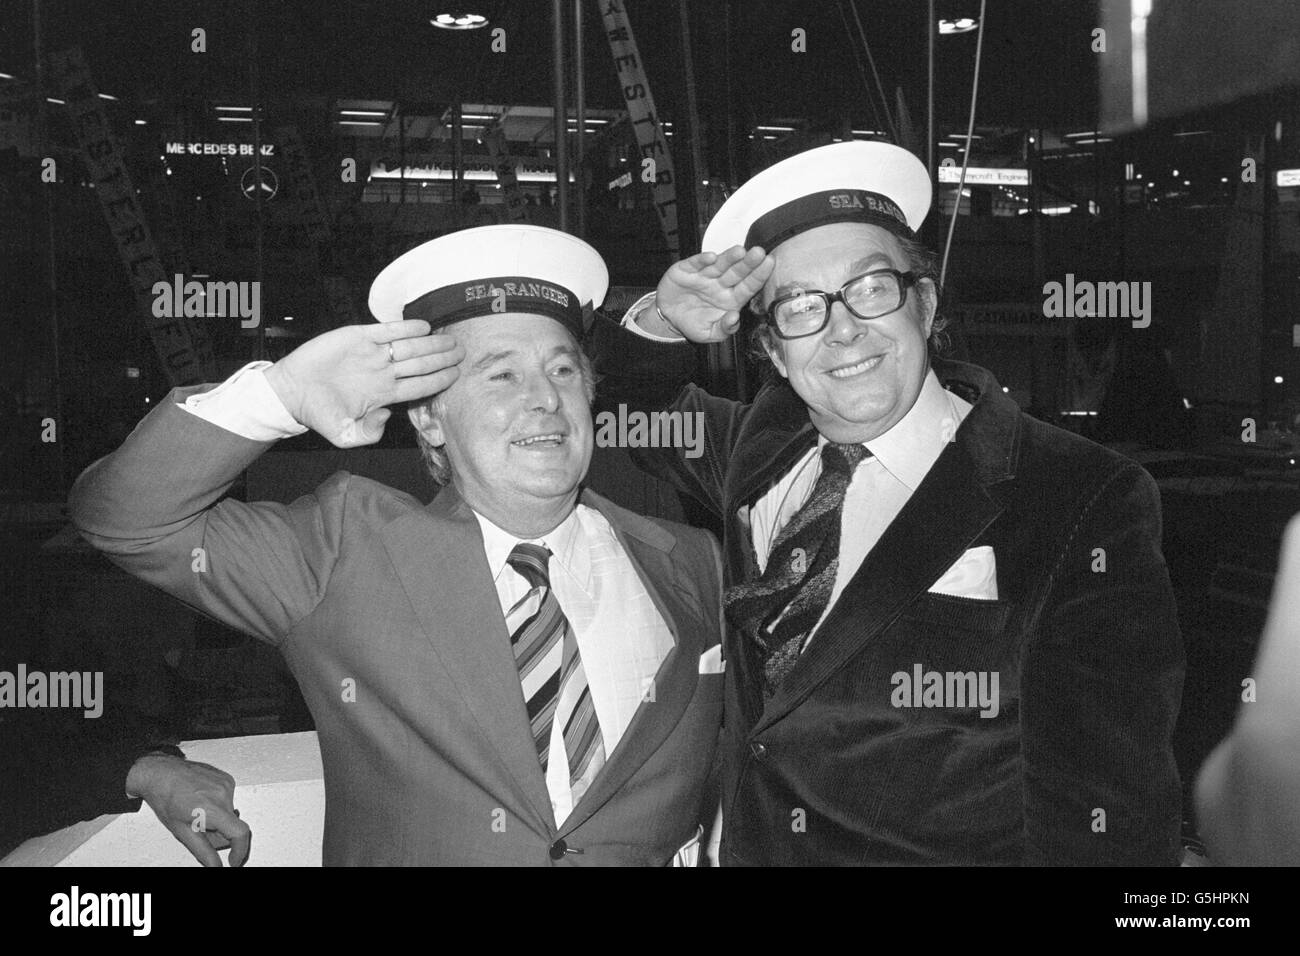 Entertainment - Morecambe and Wise - 27th London International Boat Show - Earl's Court, London Stock Photo